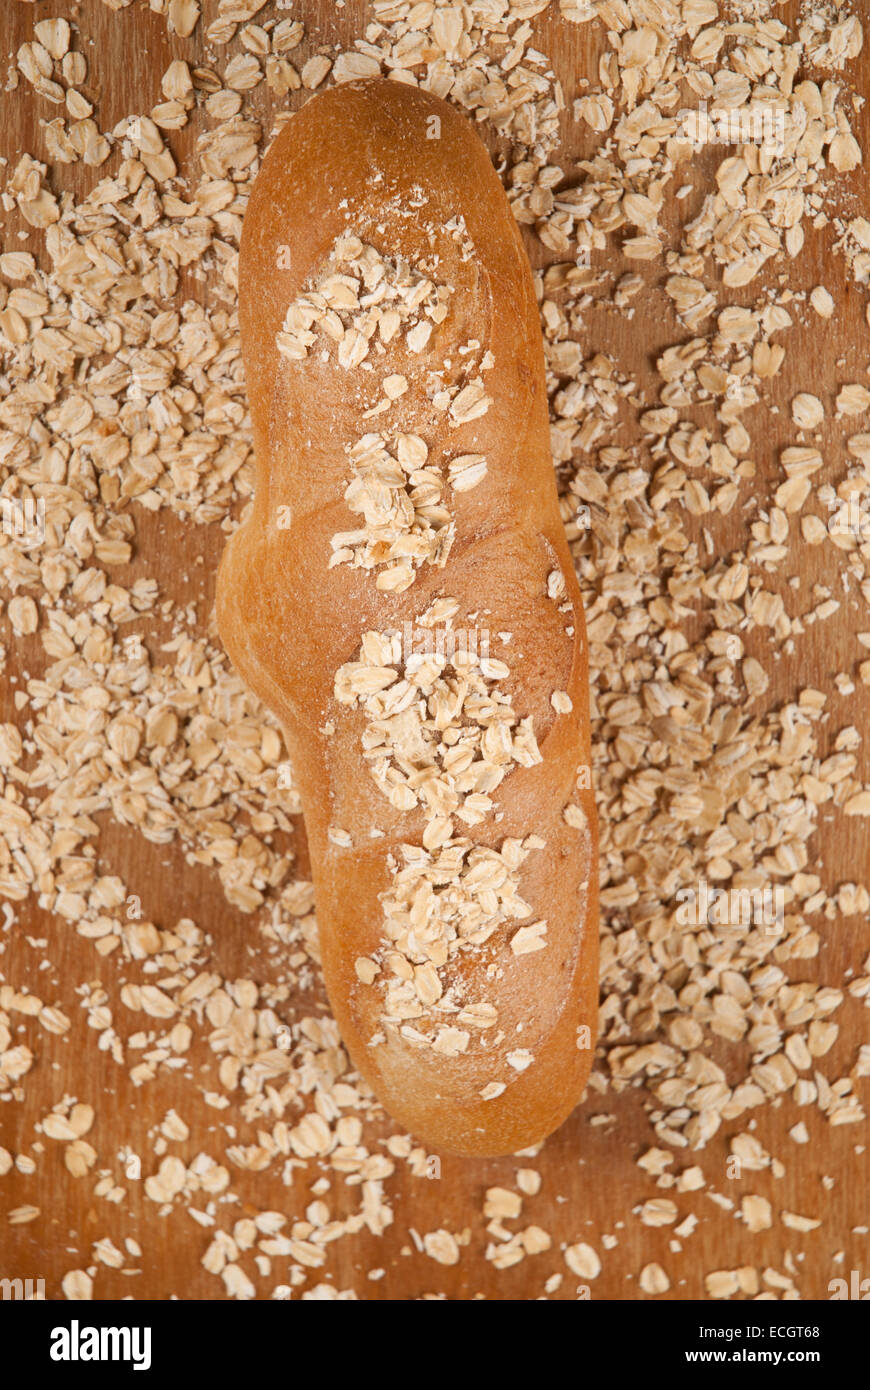 Loaf of Oat Bread Stock Photo